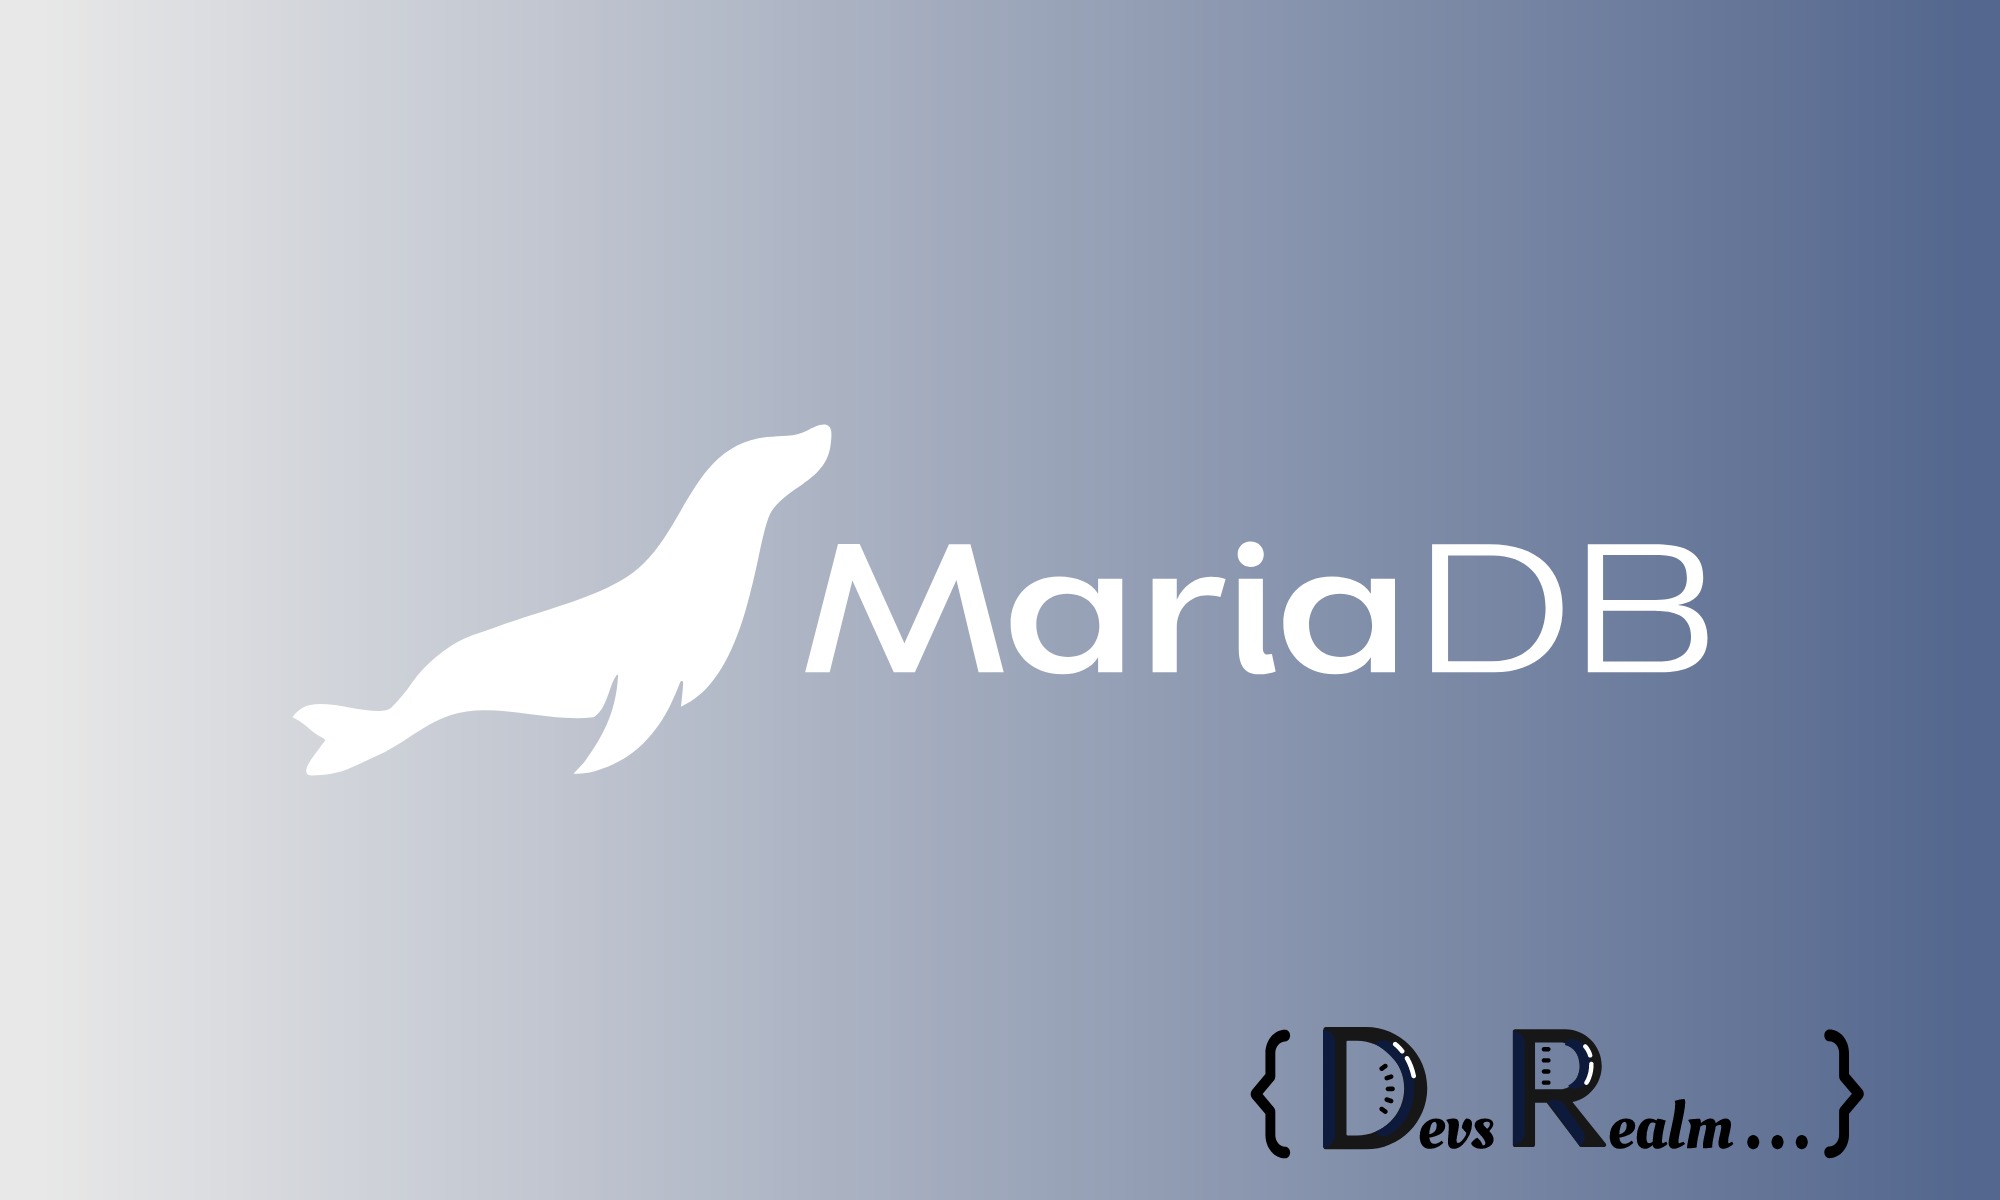 User	Accounts	and Privileges In MariaDB